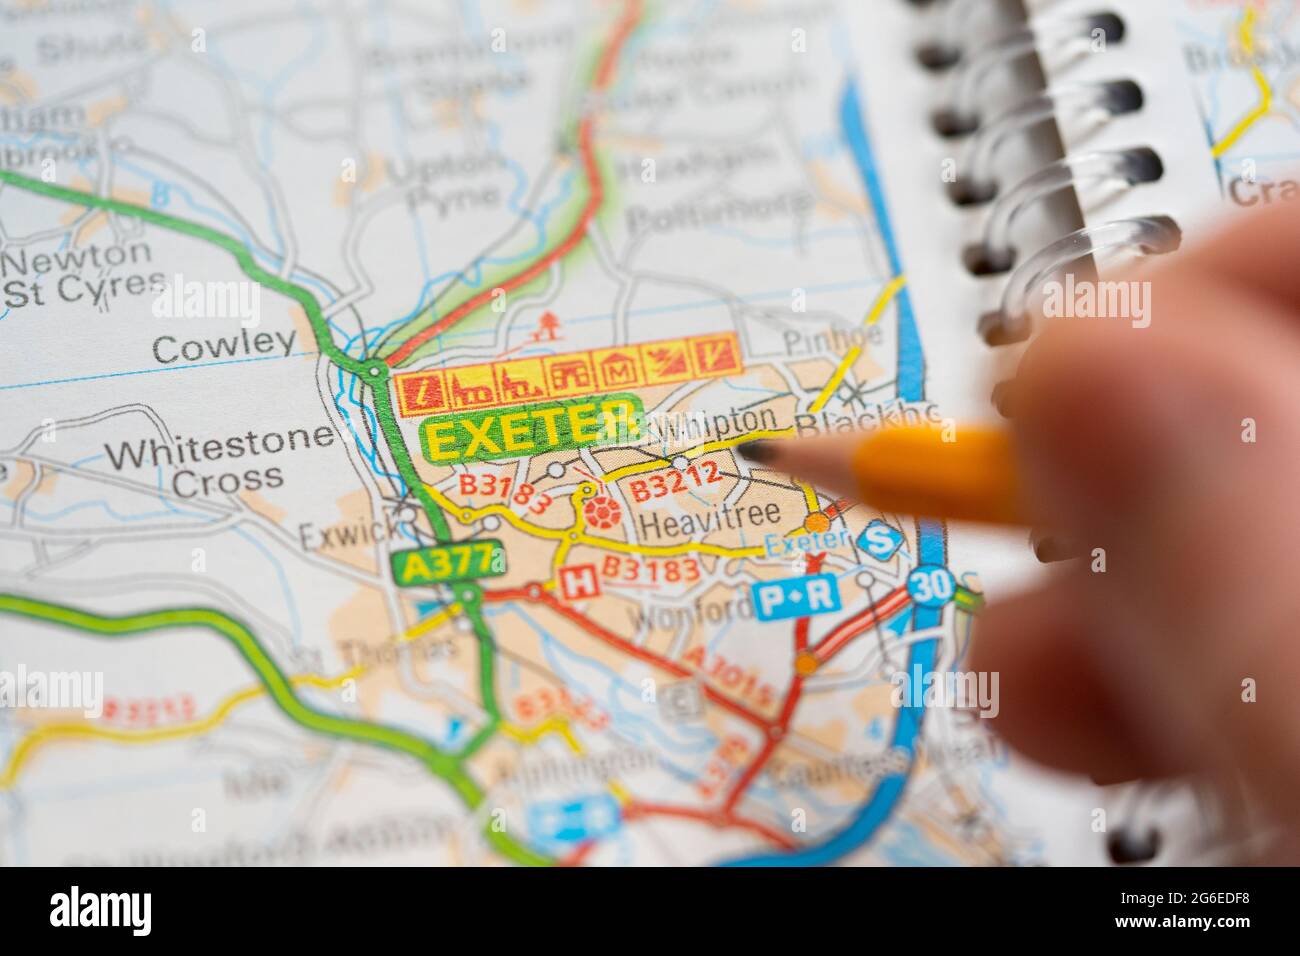 Closeup of a page in a printed road map atlas with a man's hand holding a pencil pointing at the city of Exeter in England. Concept: map reading Stock Photo